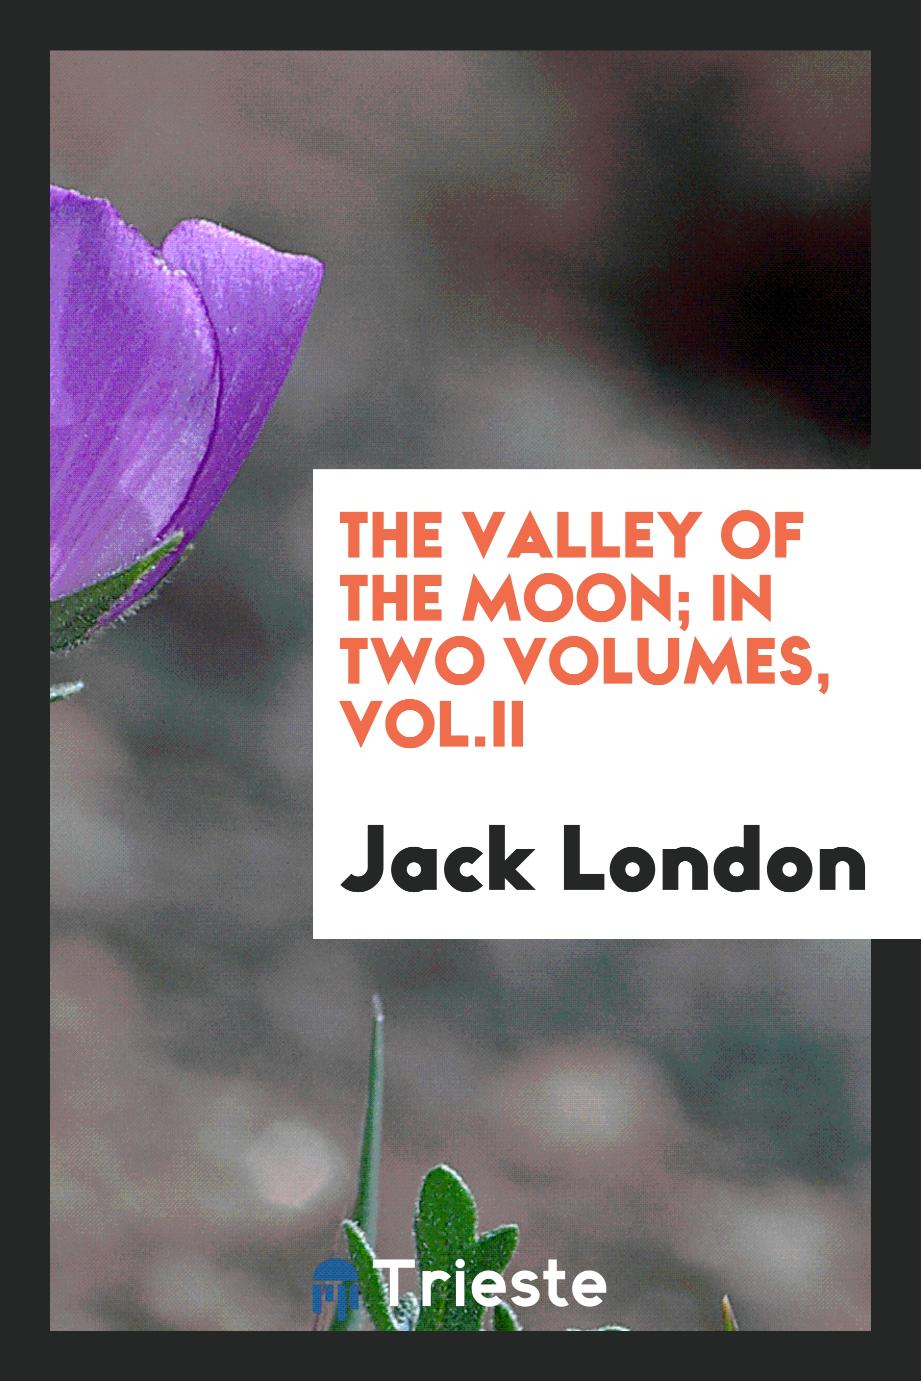 Jack London - The Valley of the Moon; in two volumes, Vol.II